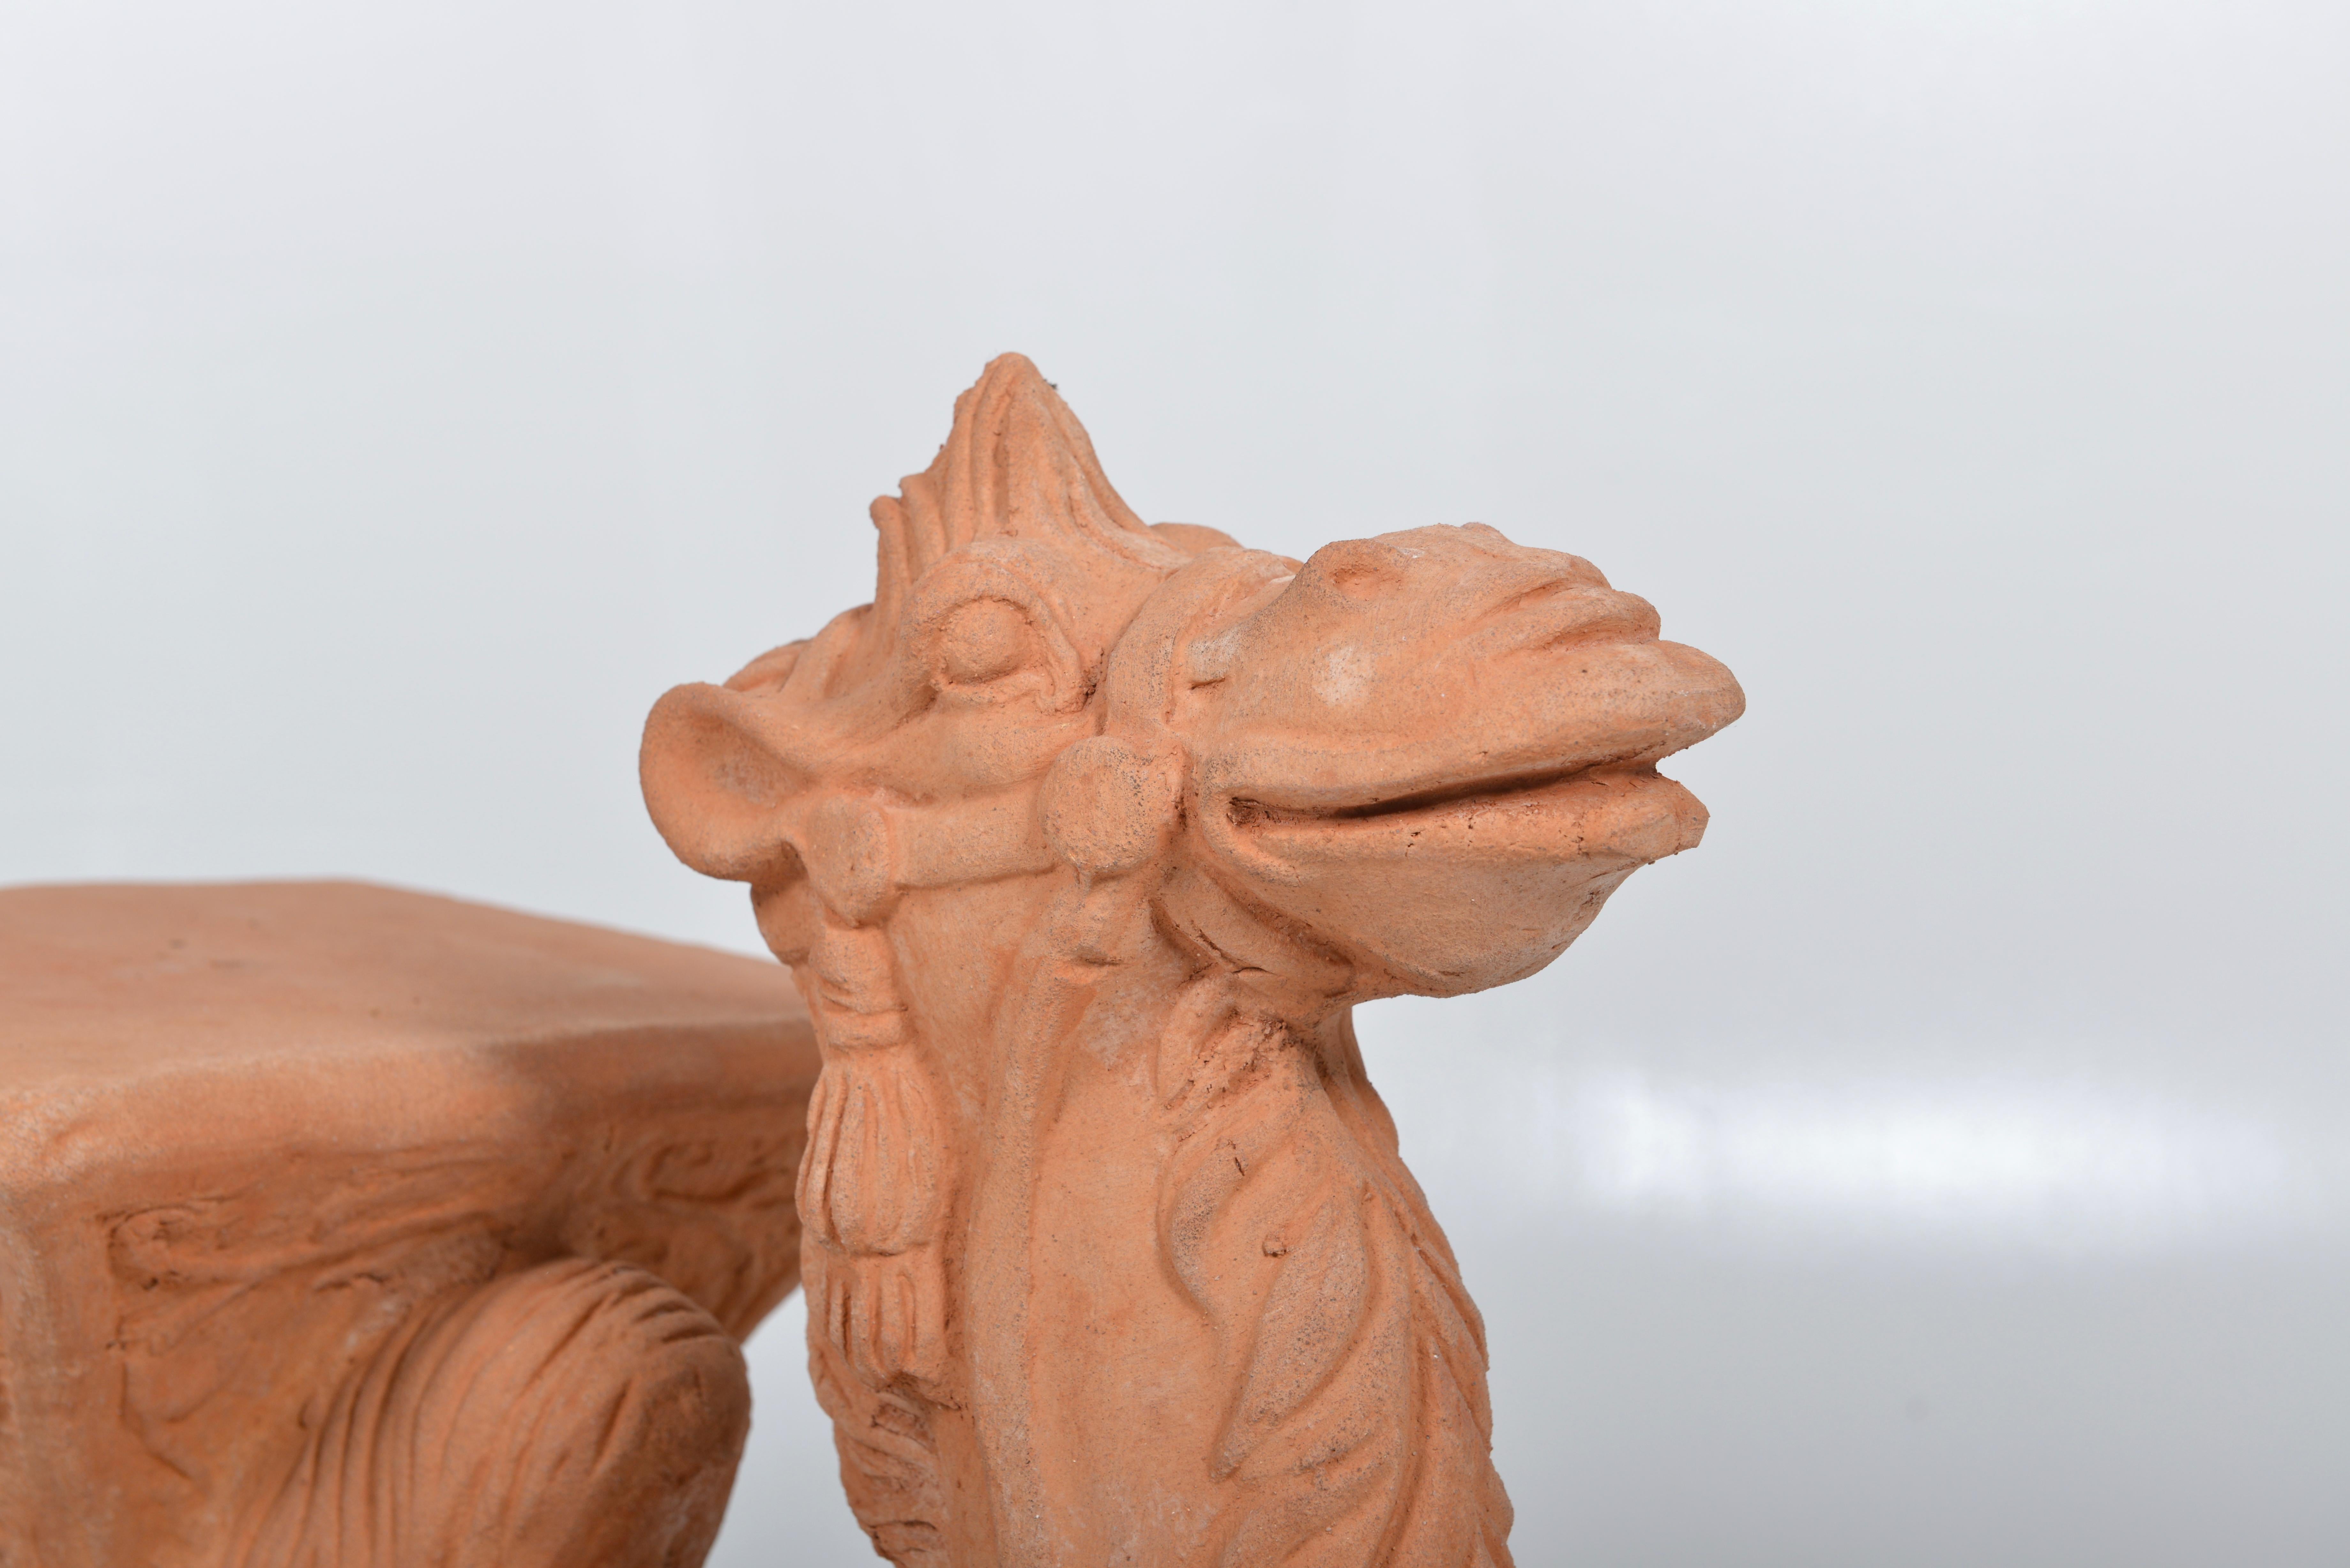 We found this camel mold in the attic of a Tuscan terracotta workshop where it was lying for decades. After checking the quality of the mold, we made this beautiful camel object again in the finest impruneta clay from Tuscany. It can be used as a